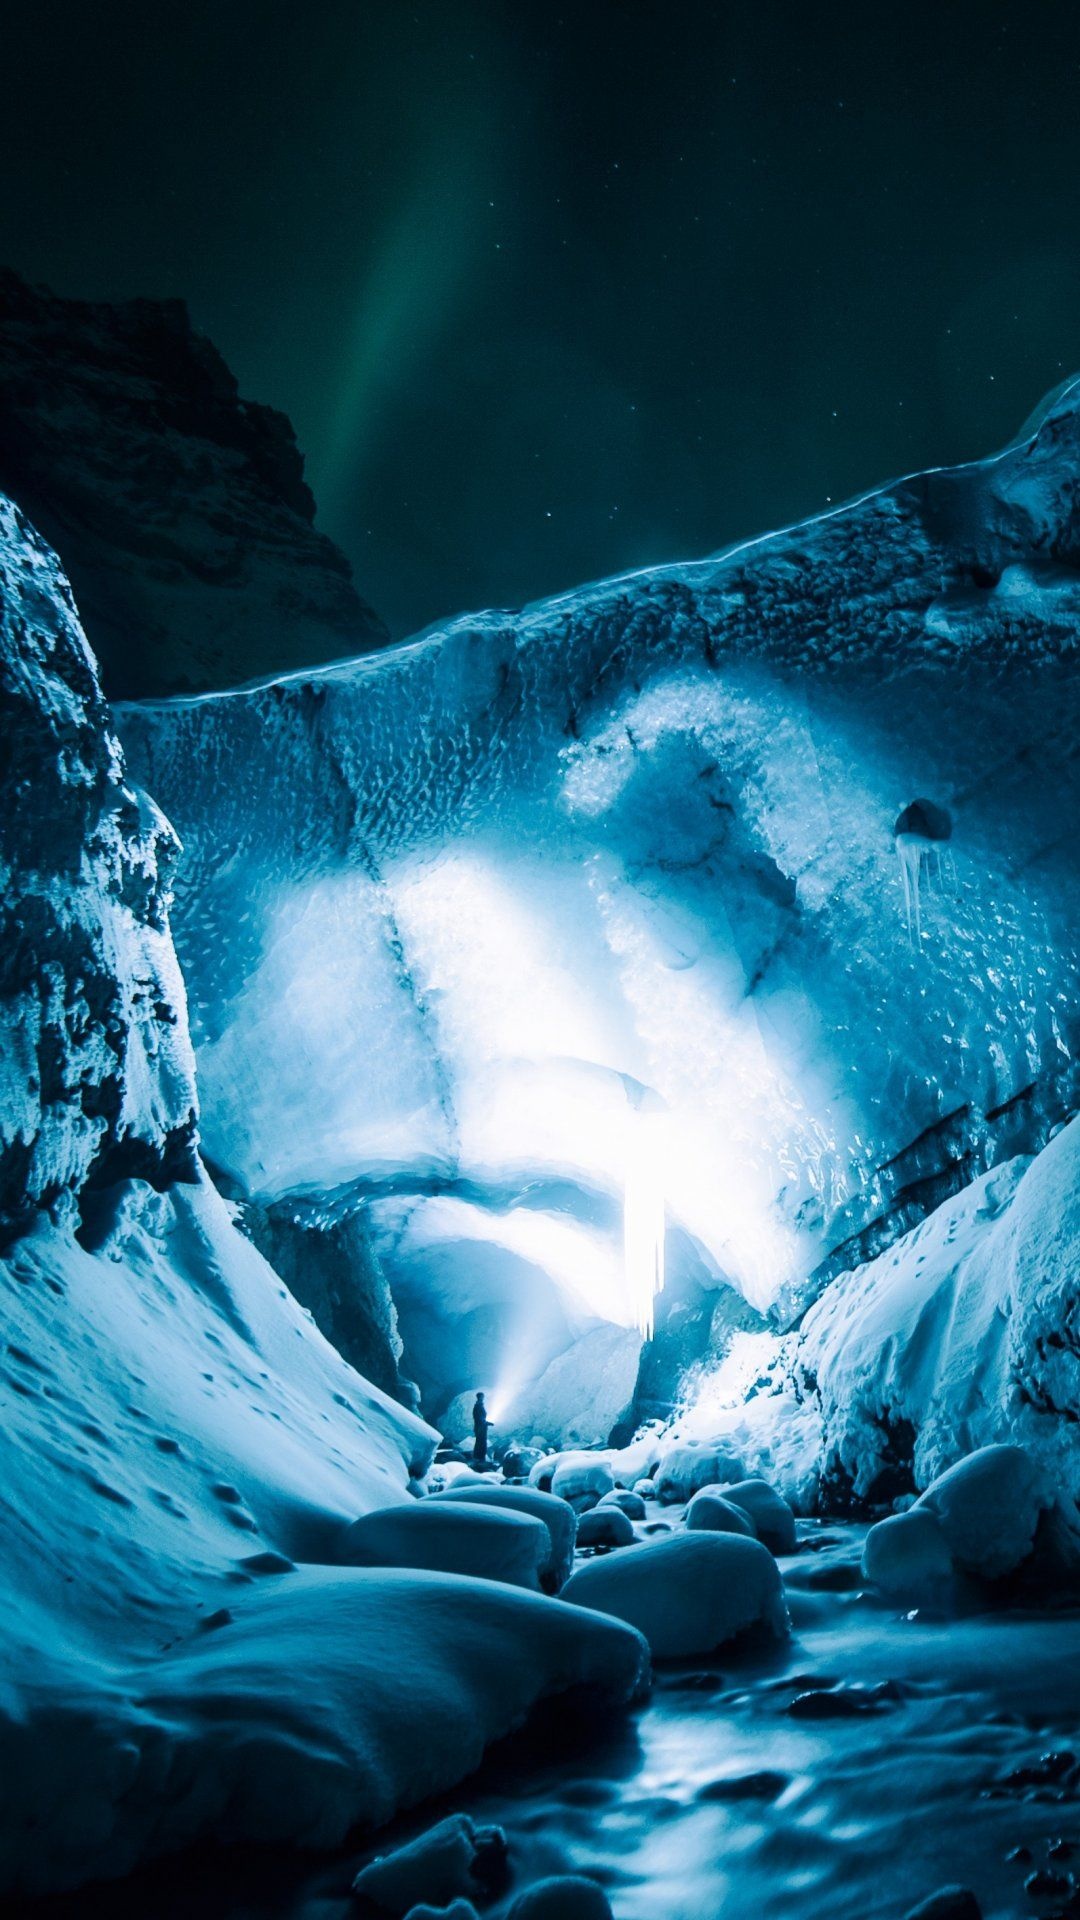 Ice Cave, Magnificent formations, Subterranean wonder, Frozen beauty, 1080x1920 Full HD Handy